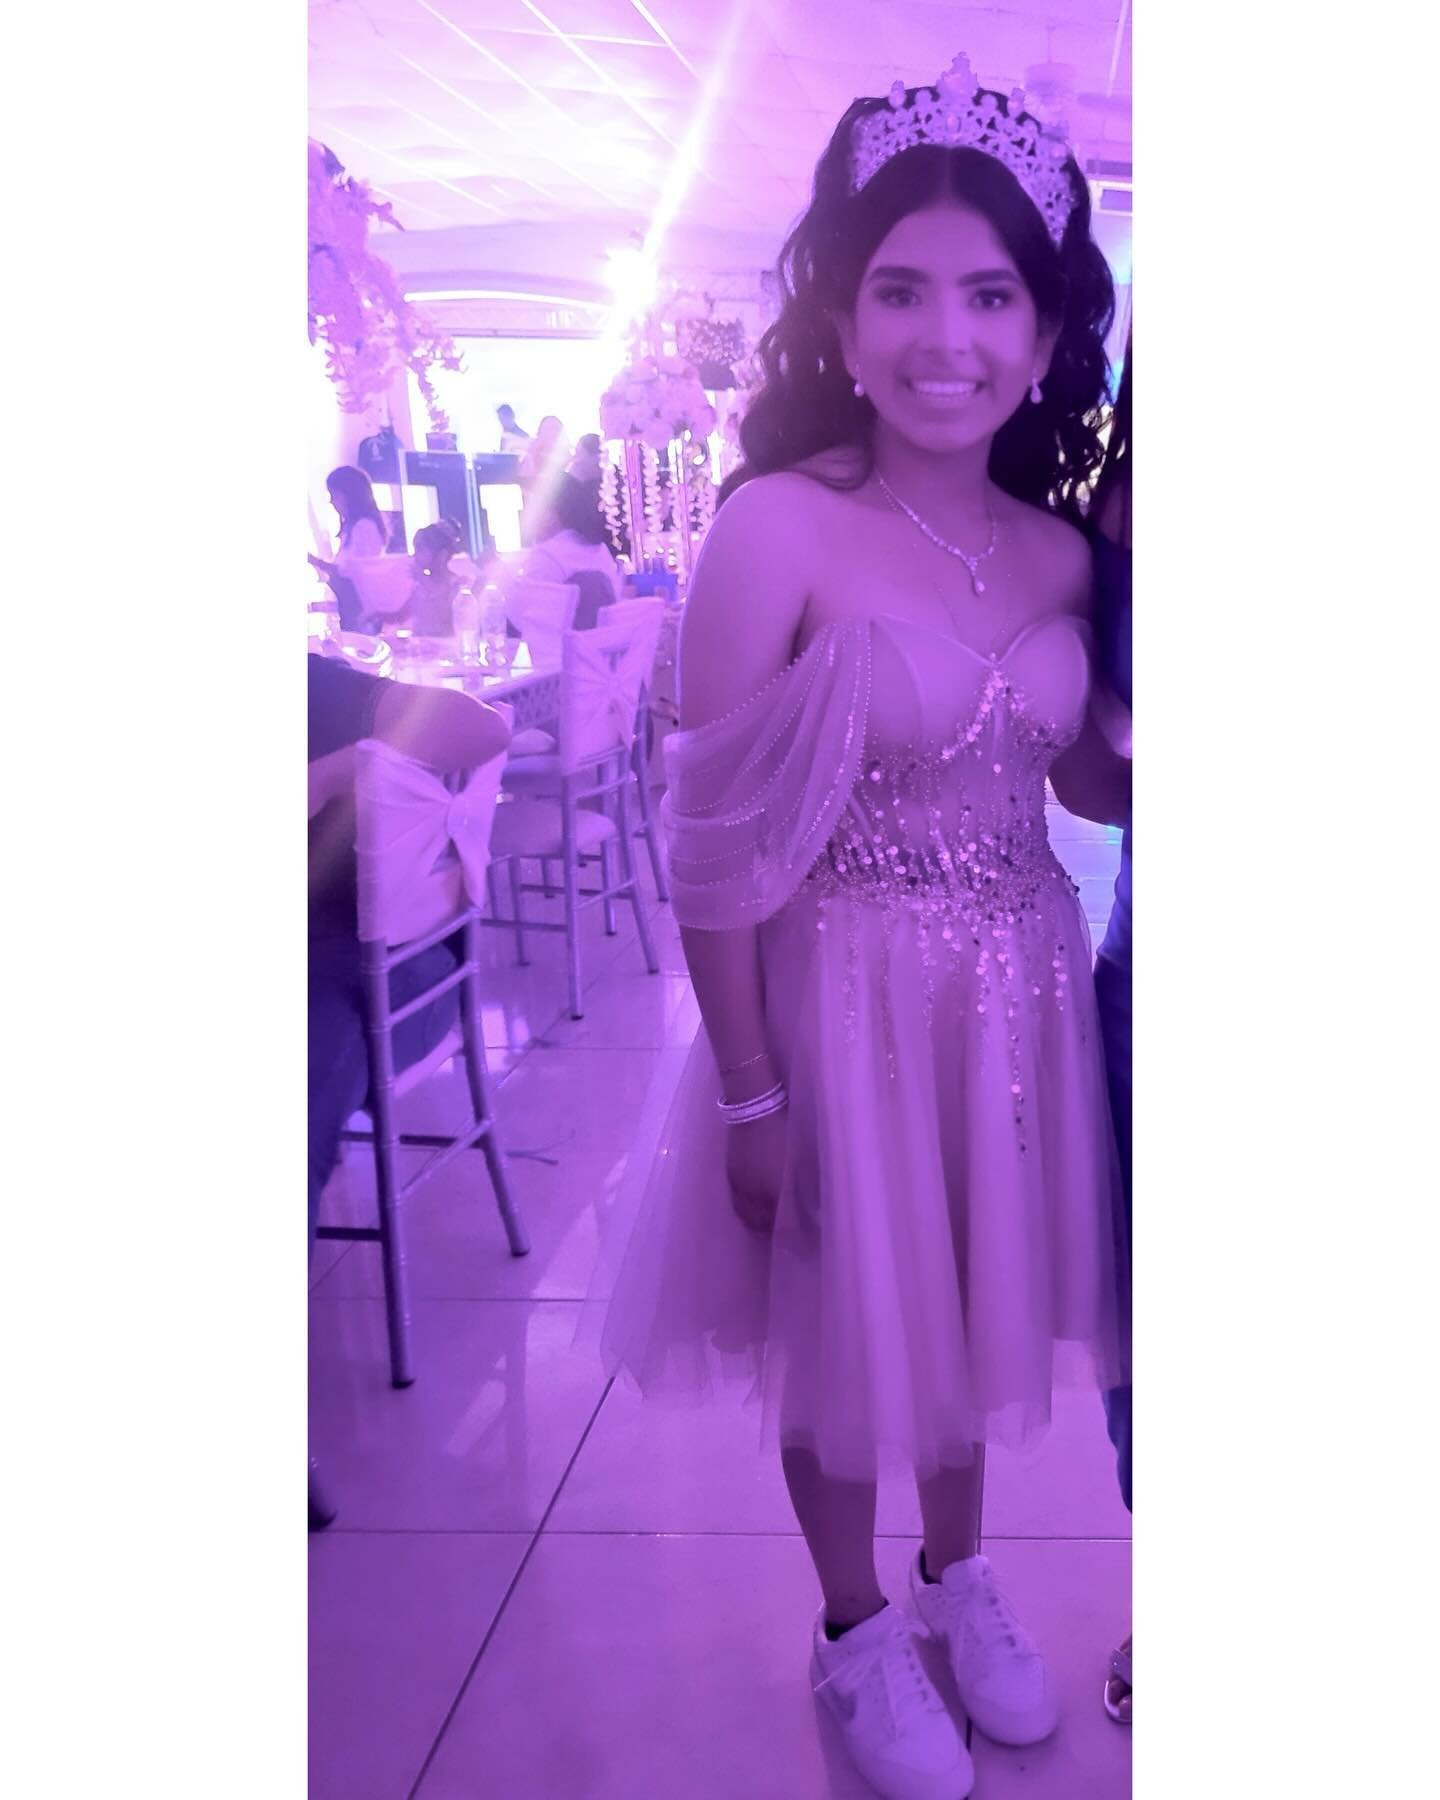 Thank you so much Ms. @mayra_elizabeth_c for your order! 💖 We hope you loved the dress!! She looks absolutely beautiful 😍✨🥰 Thank you for sharing your beautiful memories with us 🙏🏼✨
✨
✨ ✨
✨✨
✨✨✨
✨✨✨✨
✨✨✨✨✨
✨✨✨✨
✨✨✨
✨✨
✨
#mycastleboutique #pearla